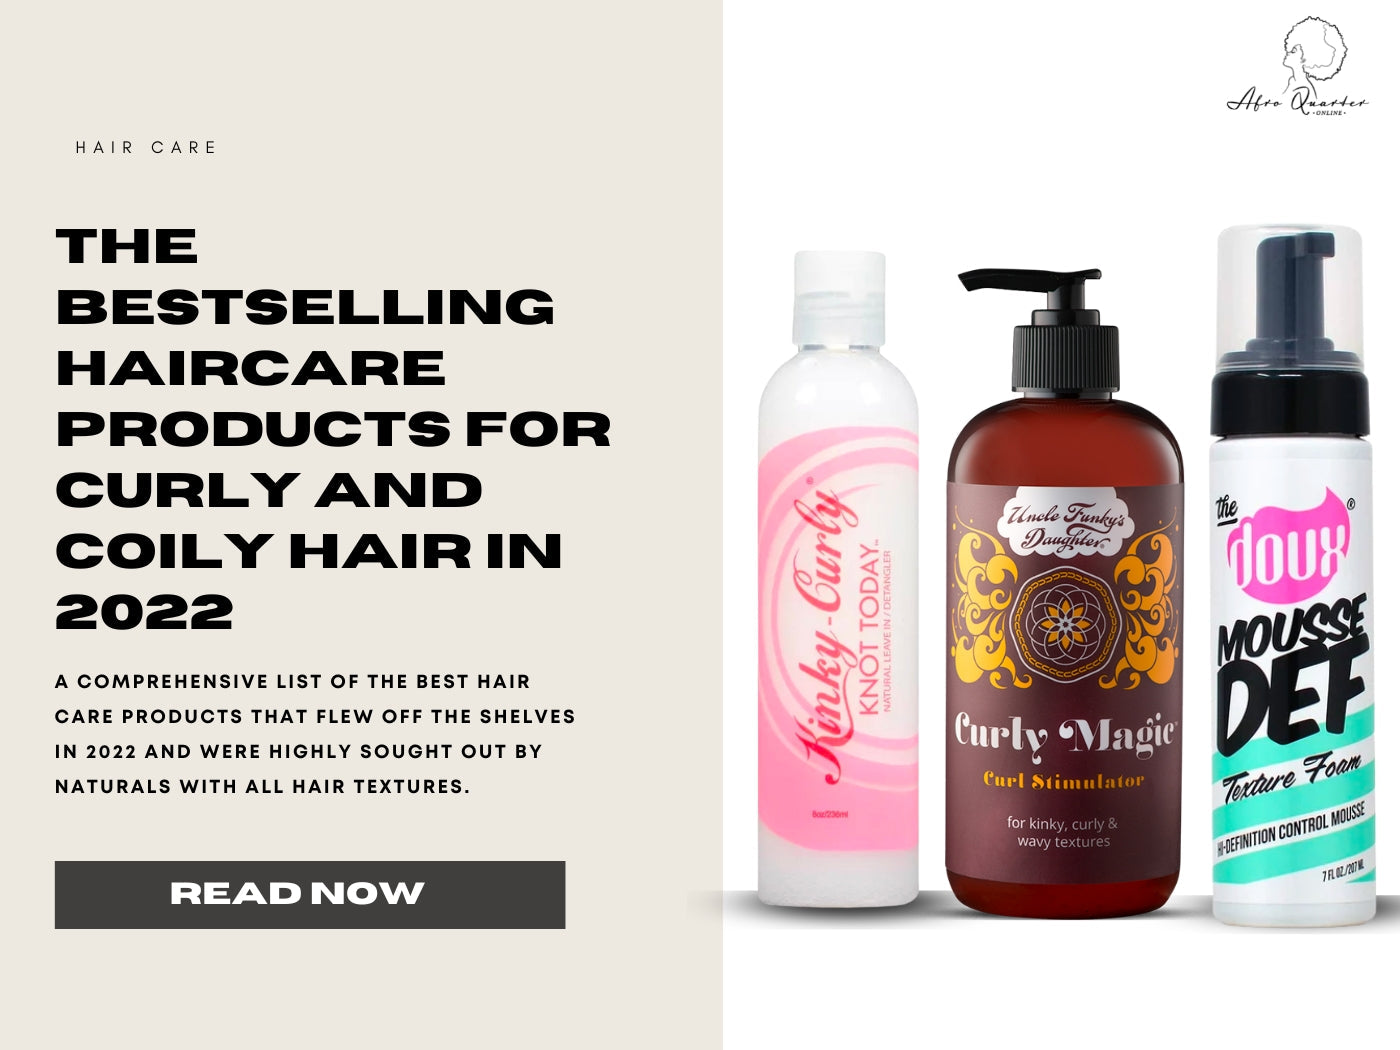 The Bestselling Haircare Products For Curly and Coily Hair in 2022- AQ Online